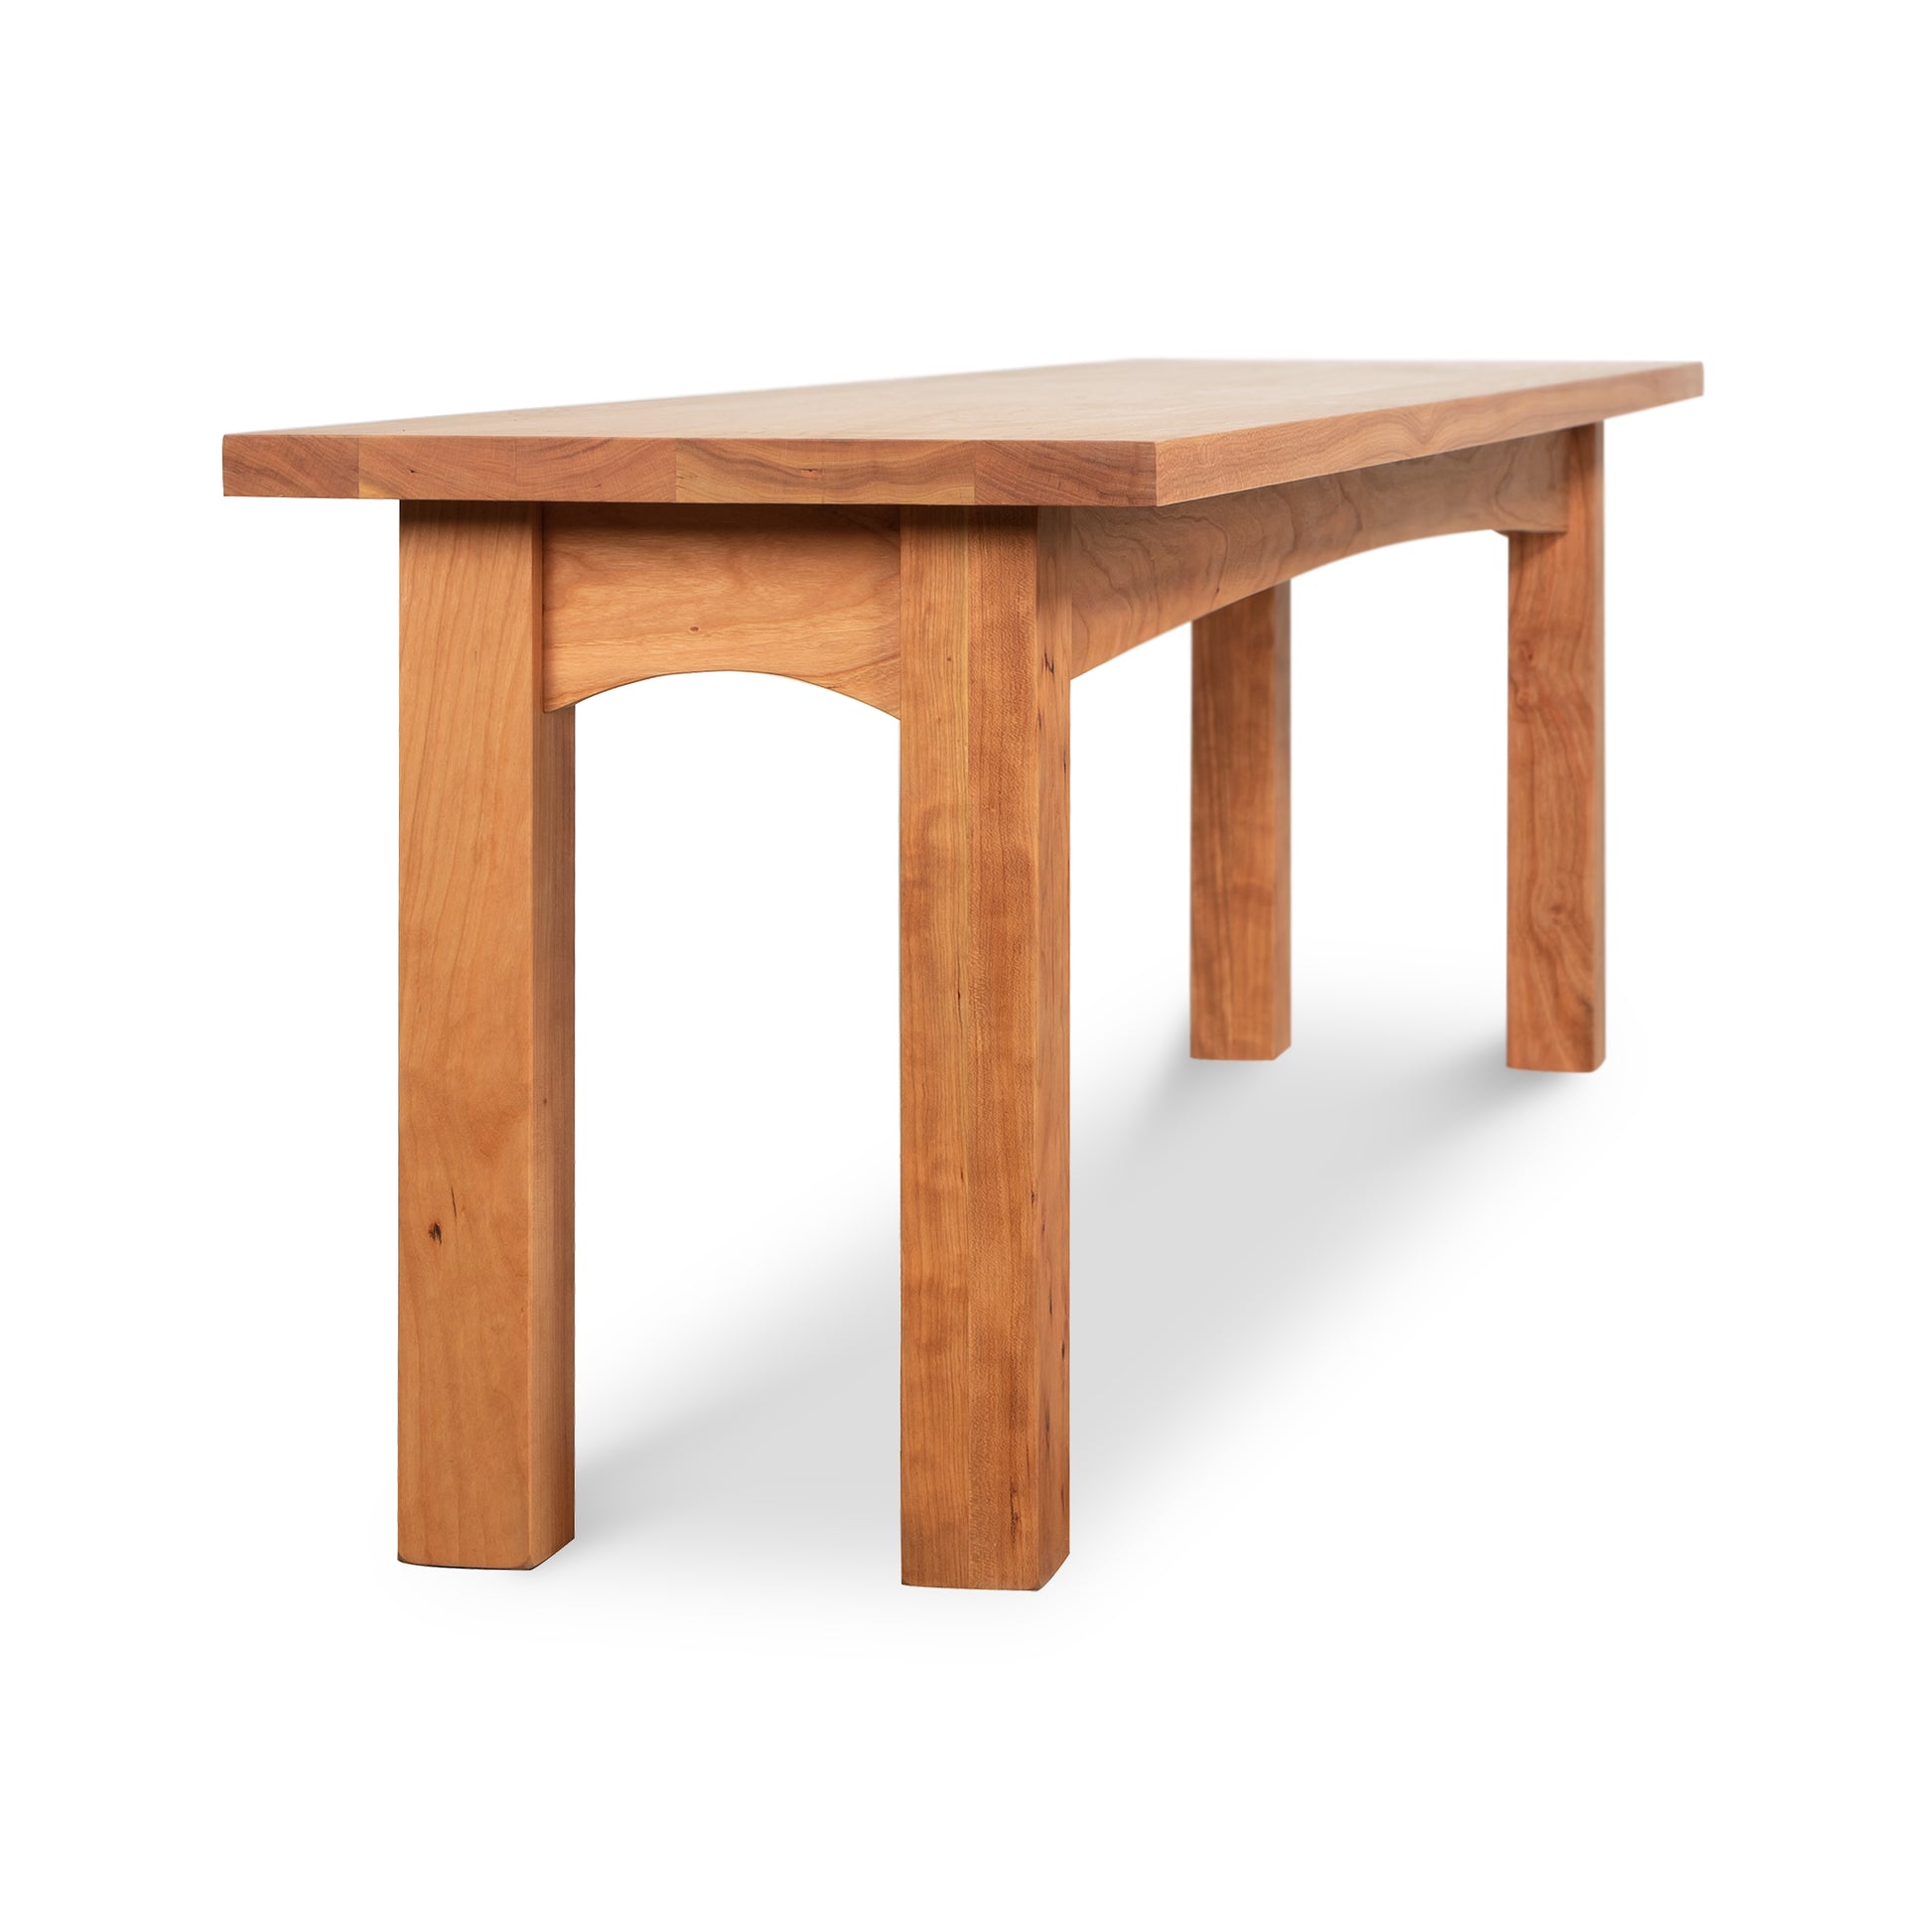 A Burlington Shaker Bench from Vermont Furniture Designs, featuring straight legs and a flat top, isolated on a white background.